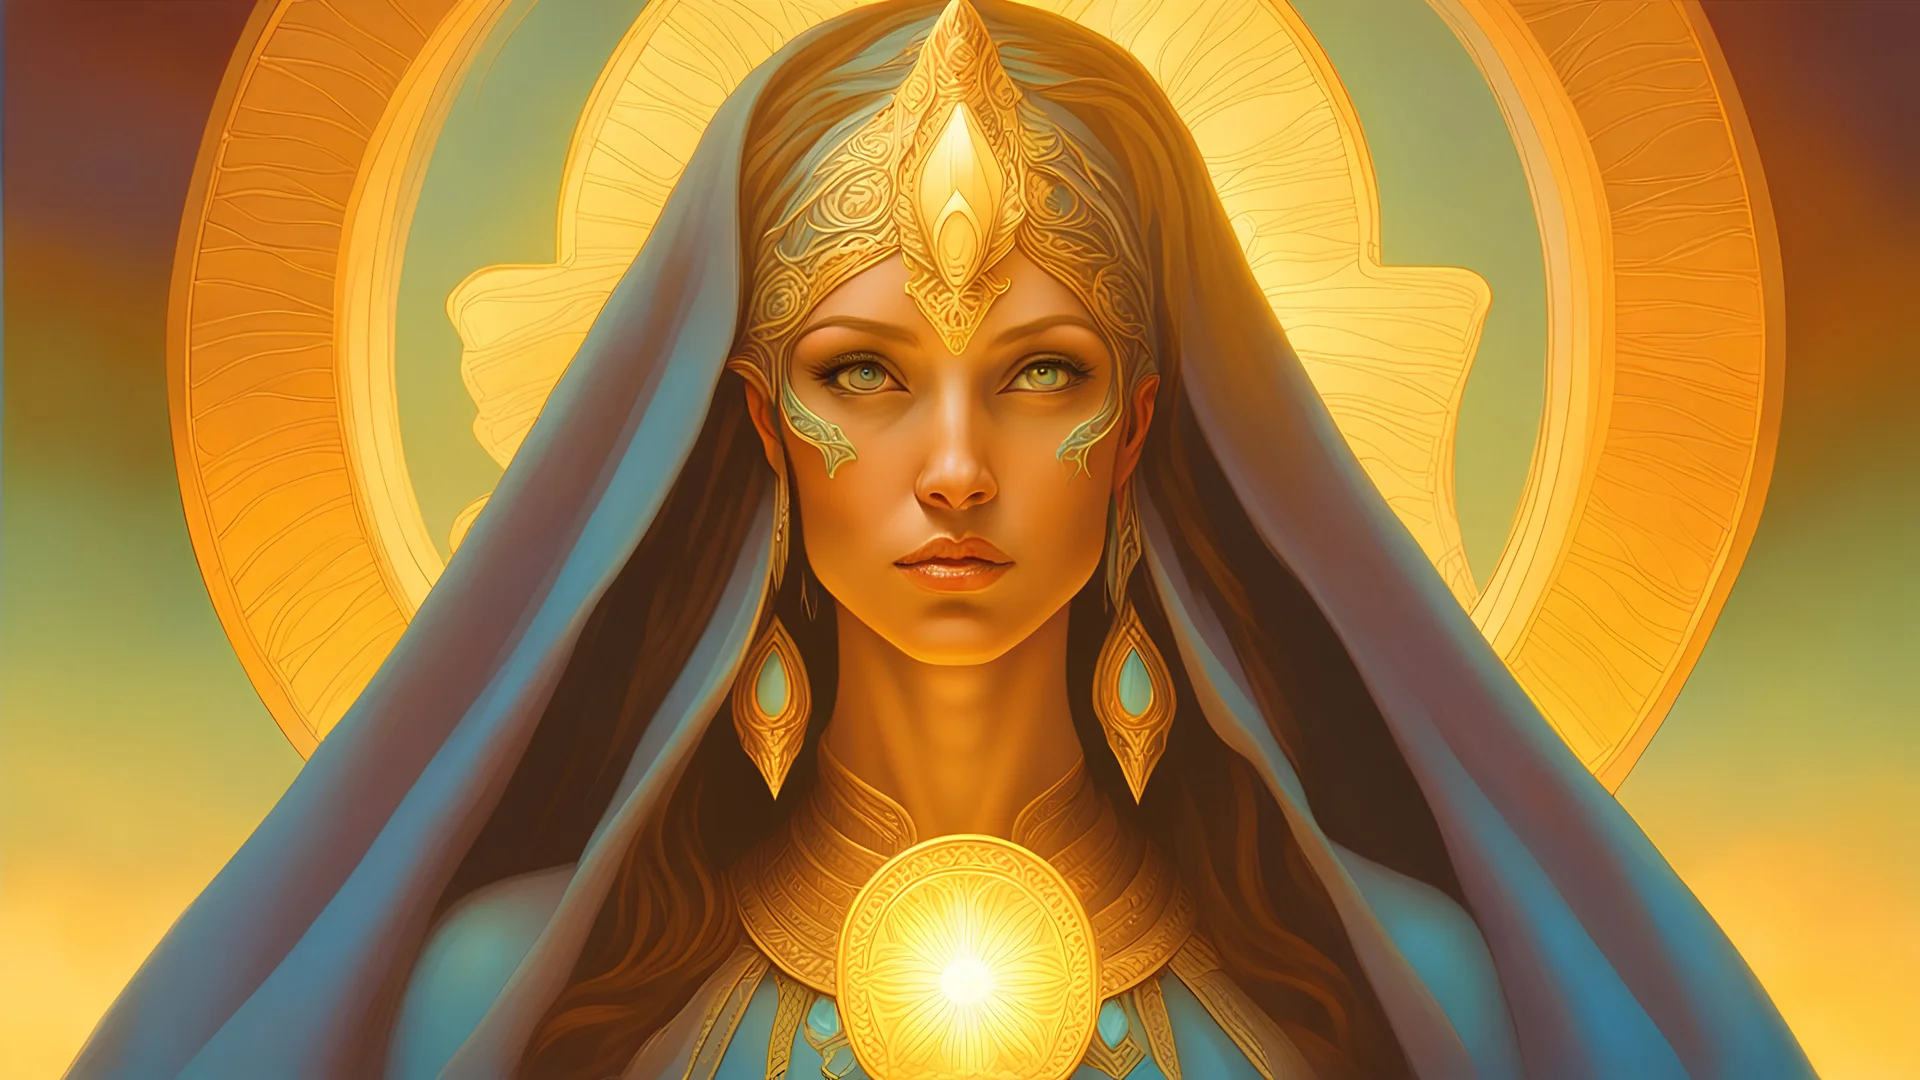 The stunning beautiful goddess of light. concept art, mid shot, intricately detailed, color depth, dramatic, 2/3 face angle, side light, colorful background. Painted by Michael Whelan